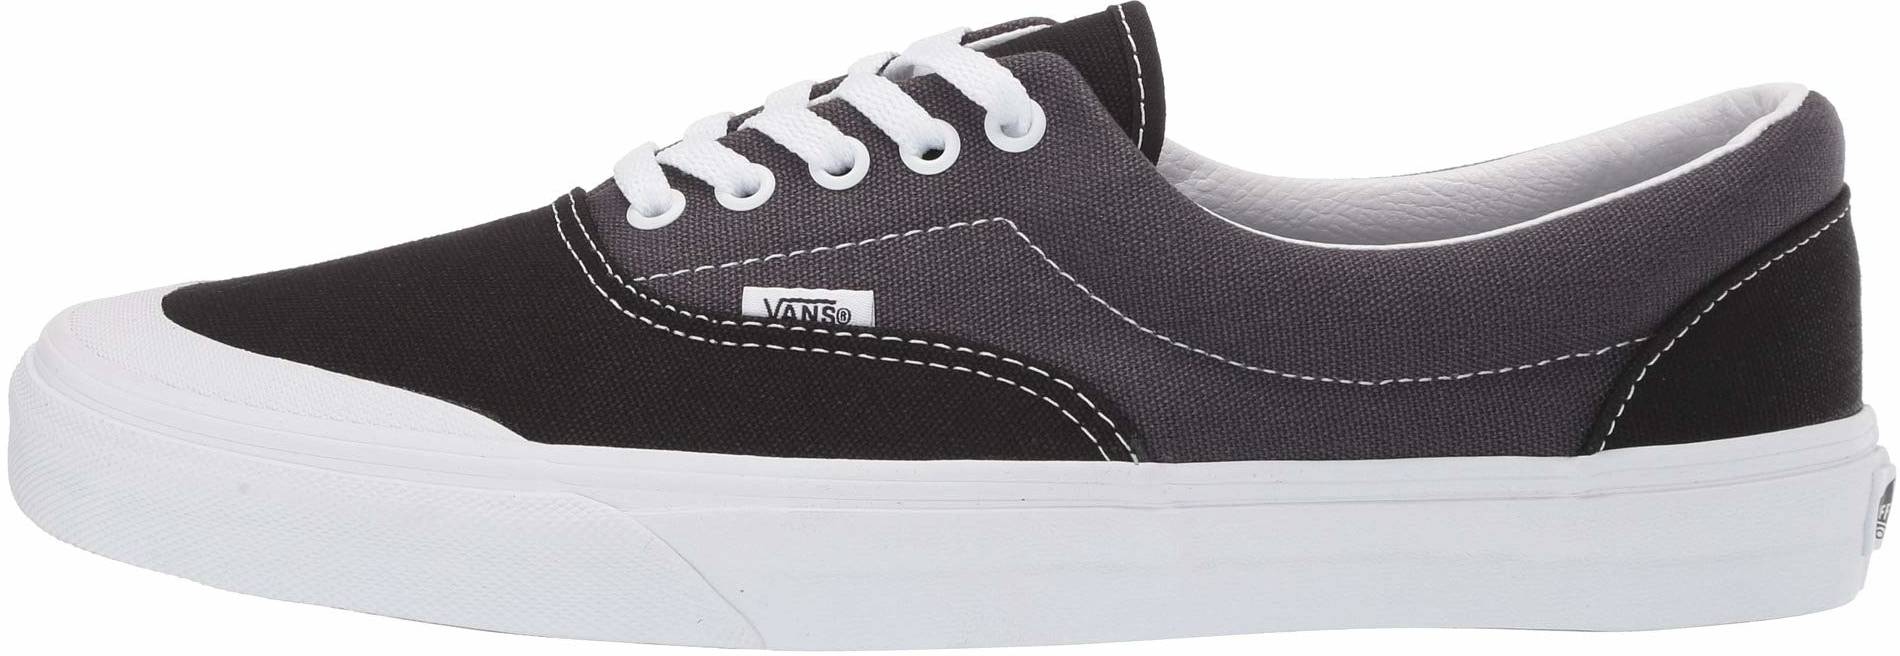 are vans good skate shoes